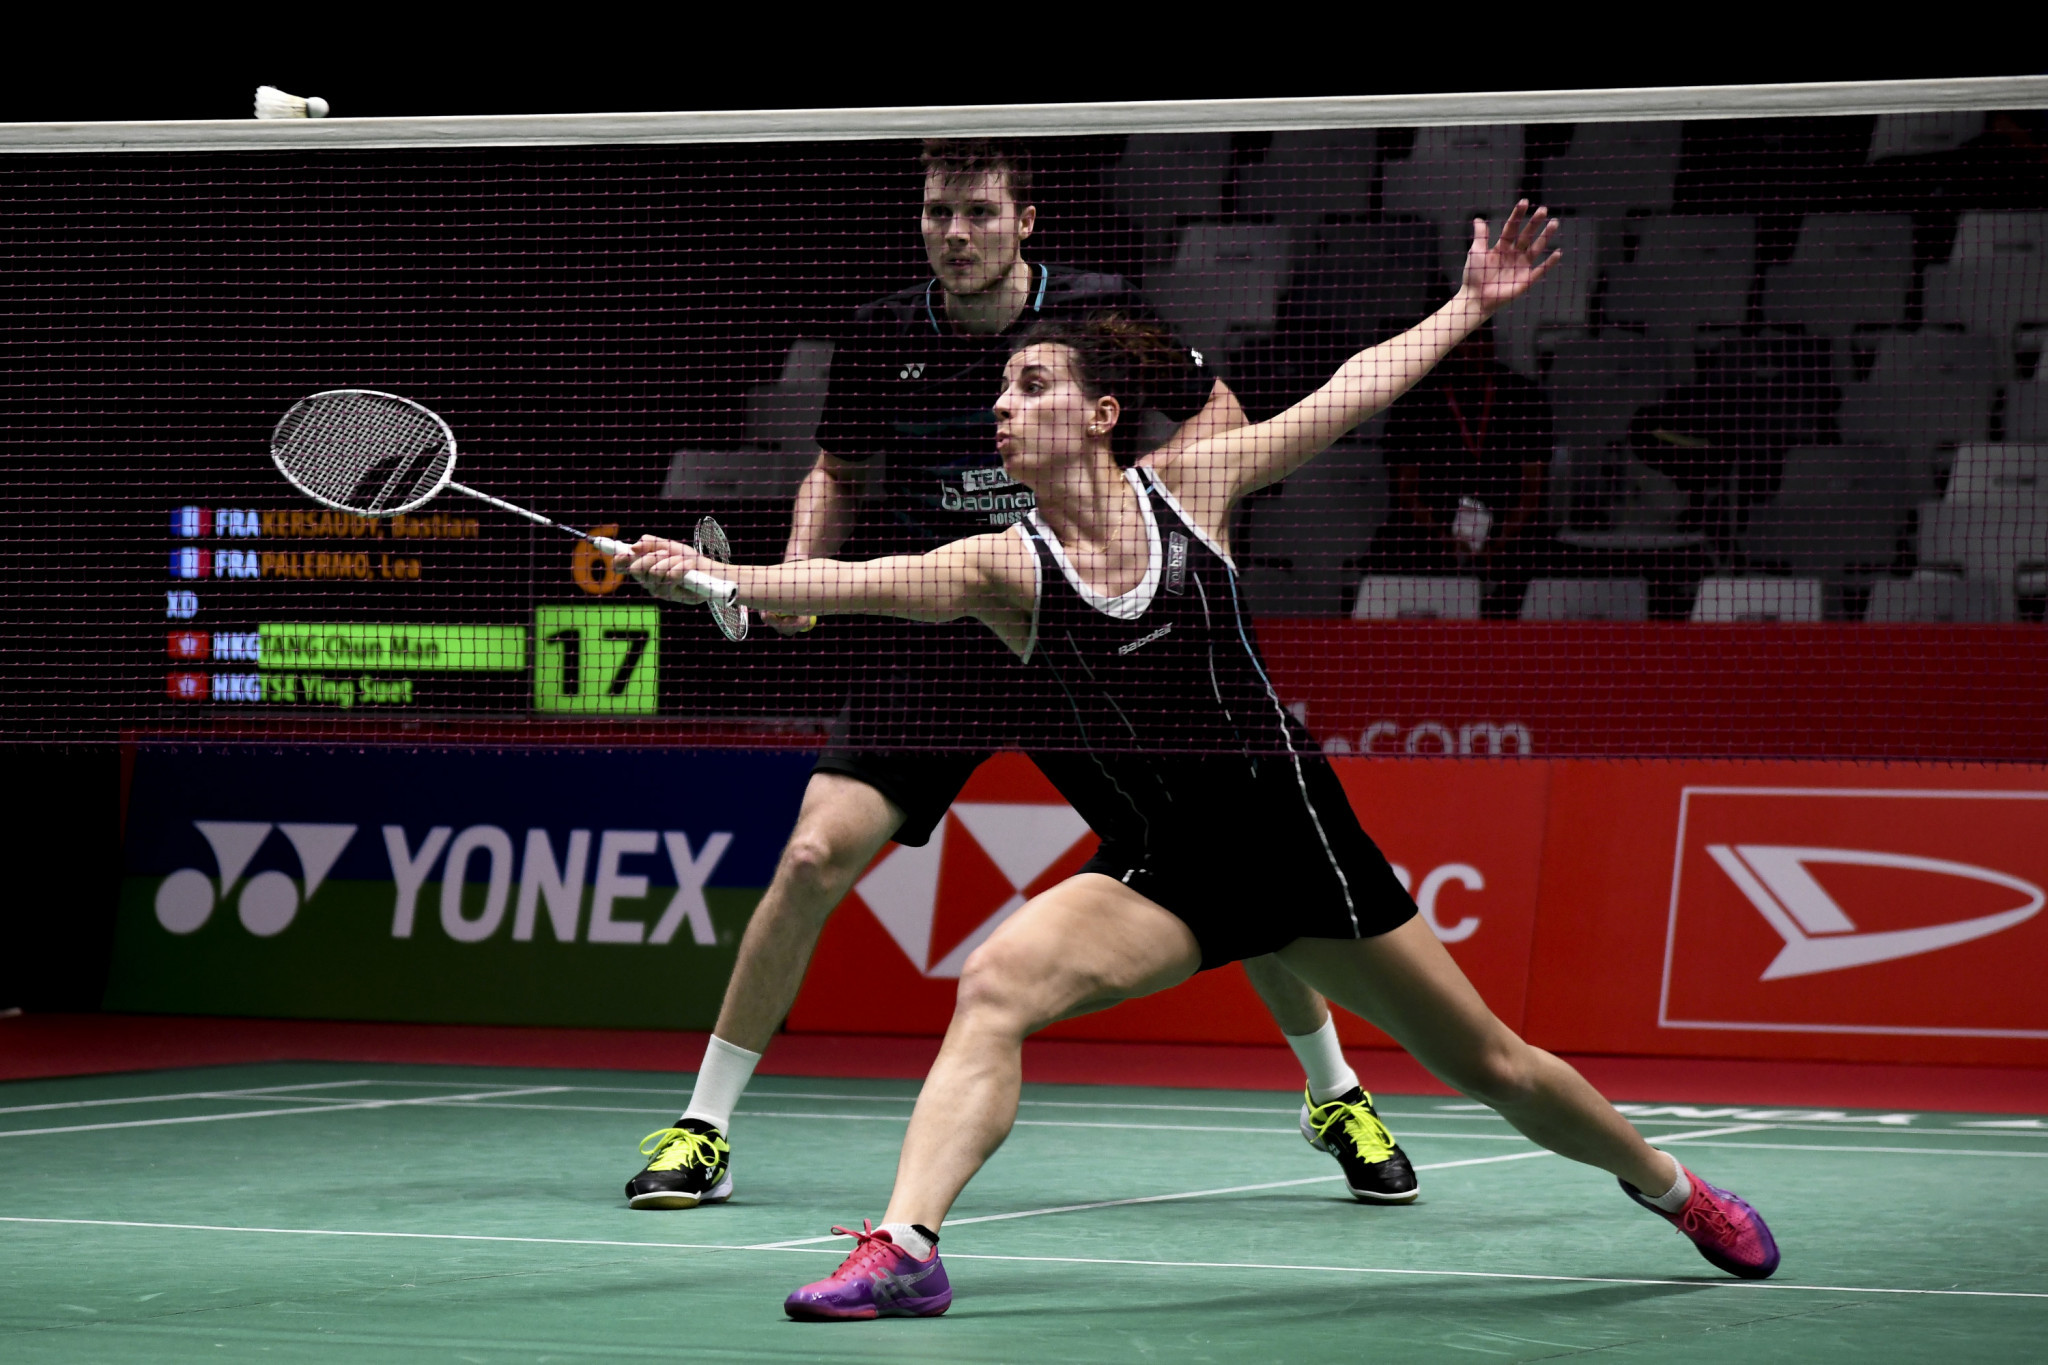 Mixed doubles top seeds Tang Chun Man and Tse Ying Suet of Hong Kong survived a scare as they fought back from a game down to beat Germany's Mark Lamsfuss and Isabel Herttrich ©Getty Images